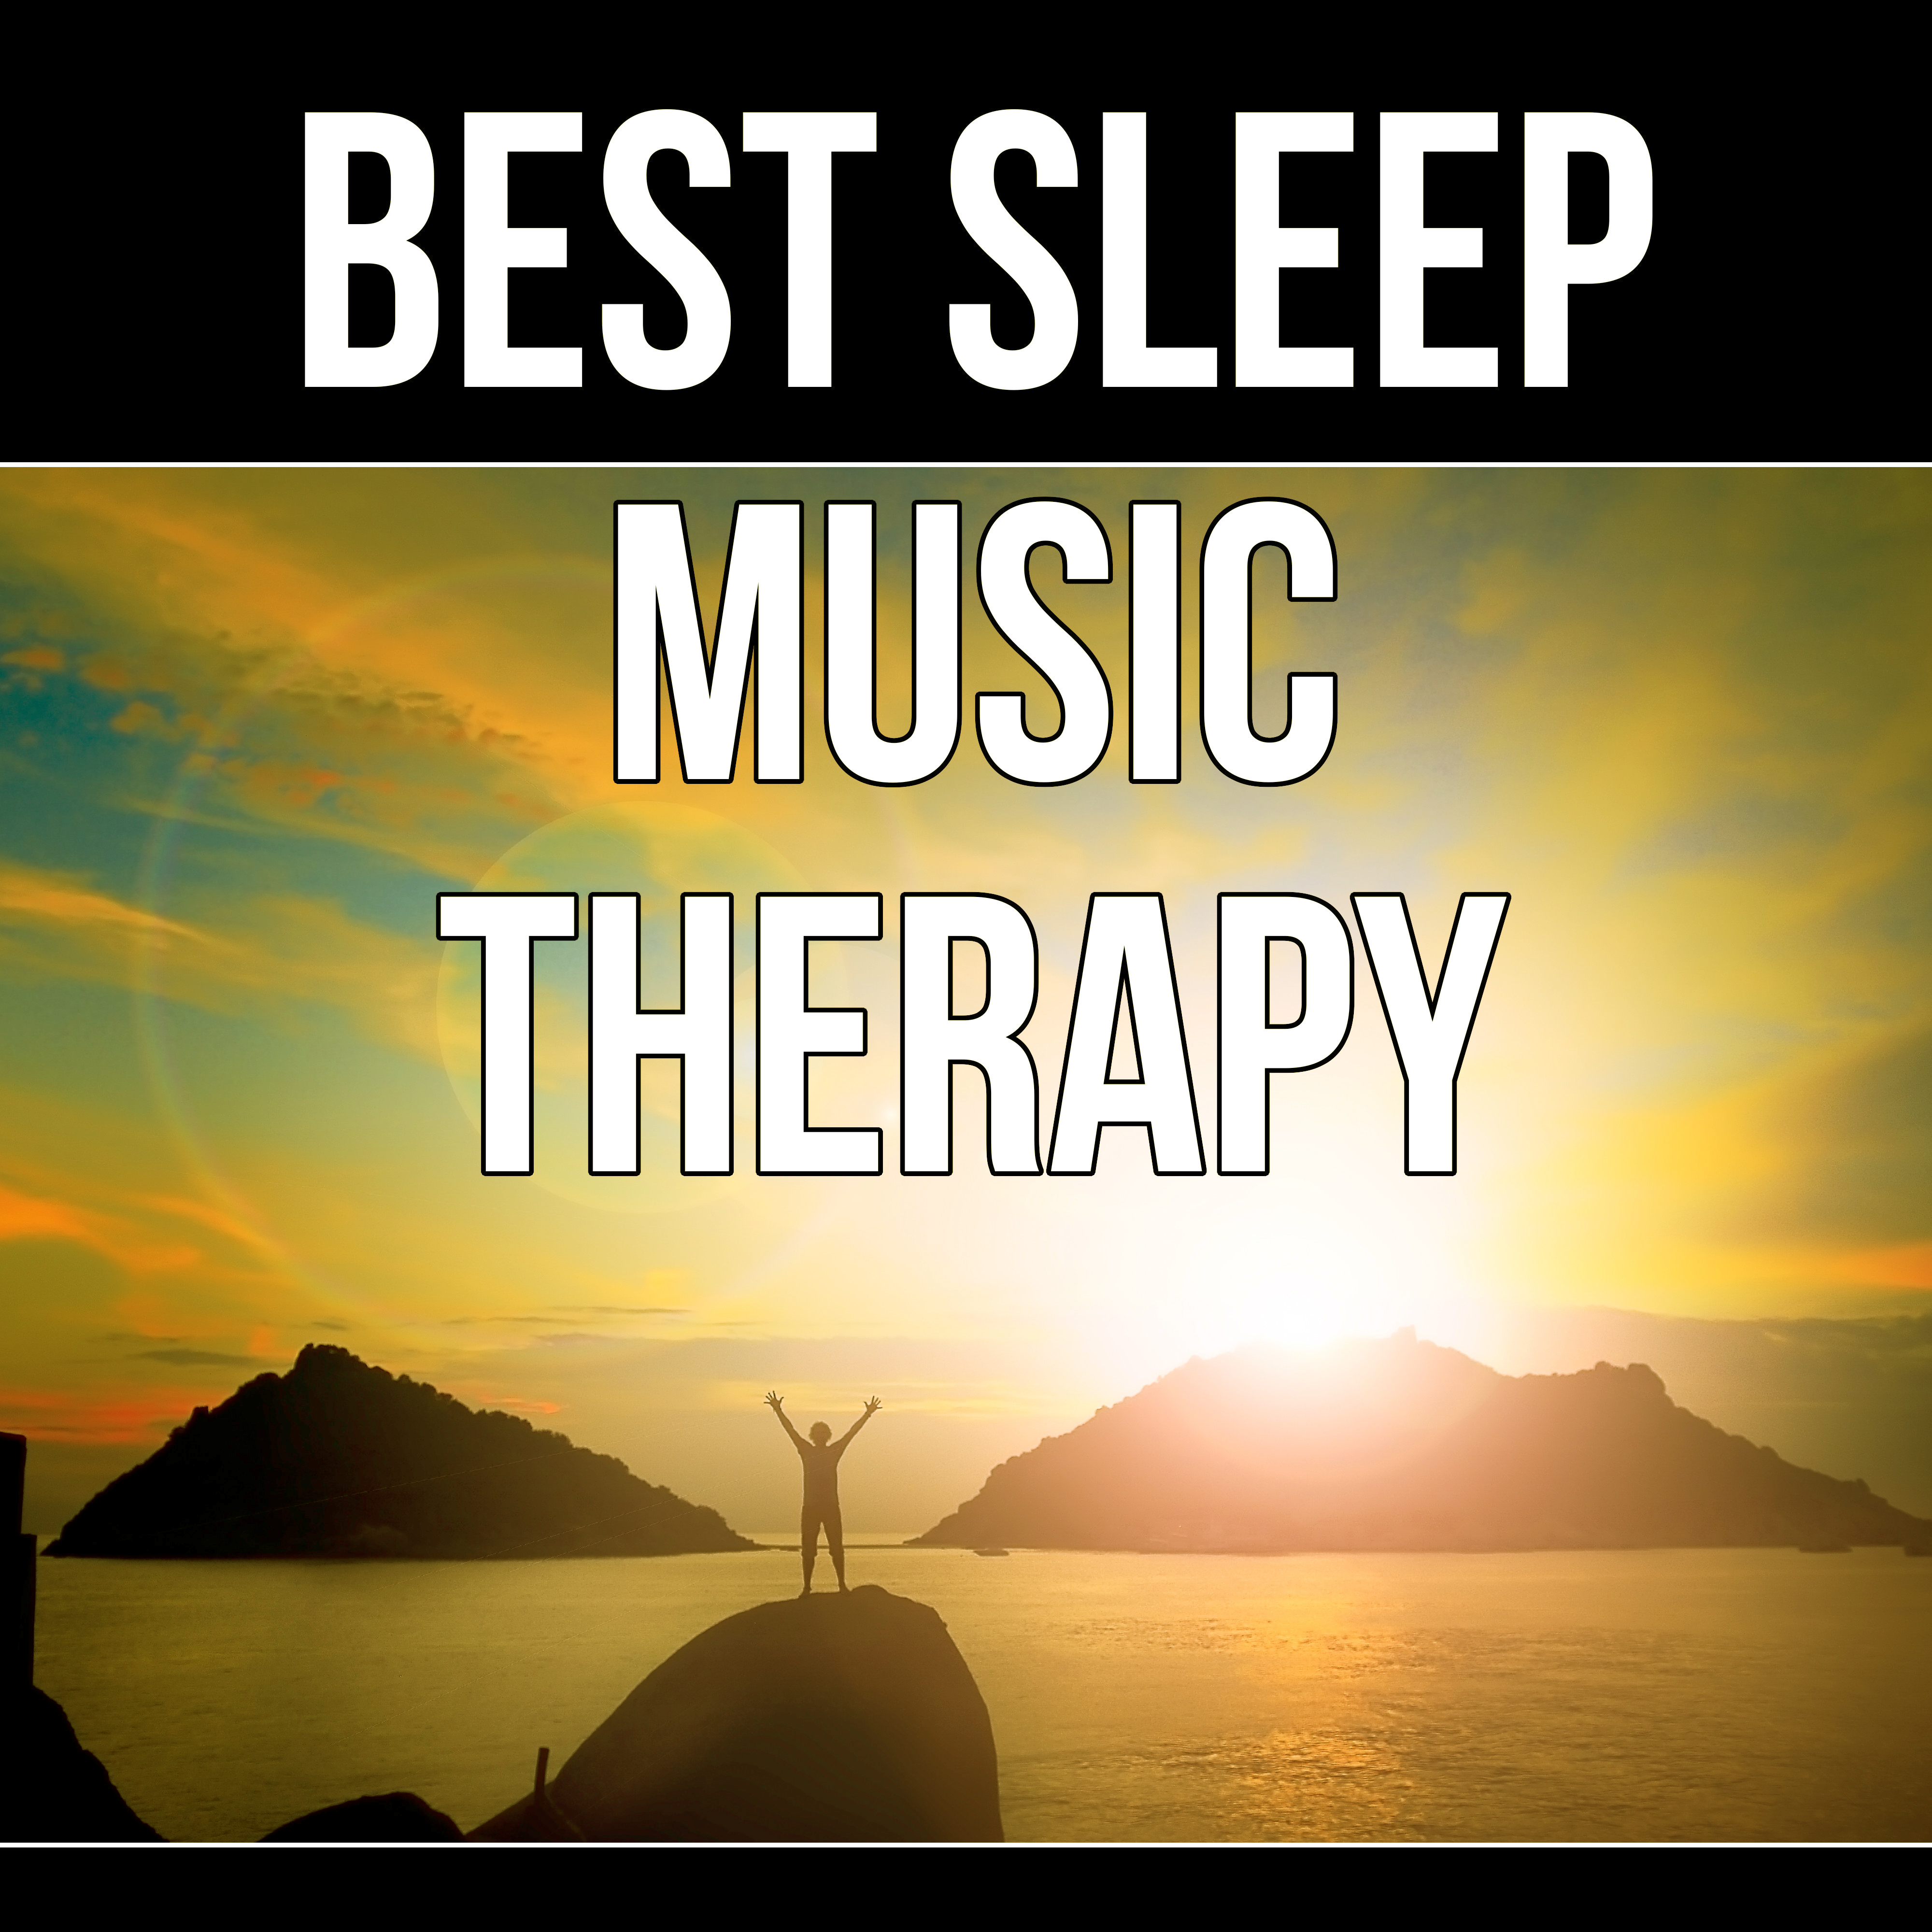 Best Sleep Music Therapy - Nature Sounds, Trouble Sleeping, Therapy Music, Relaxing Background Music